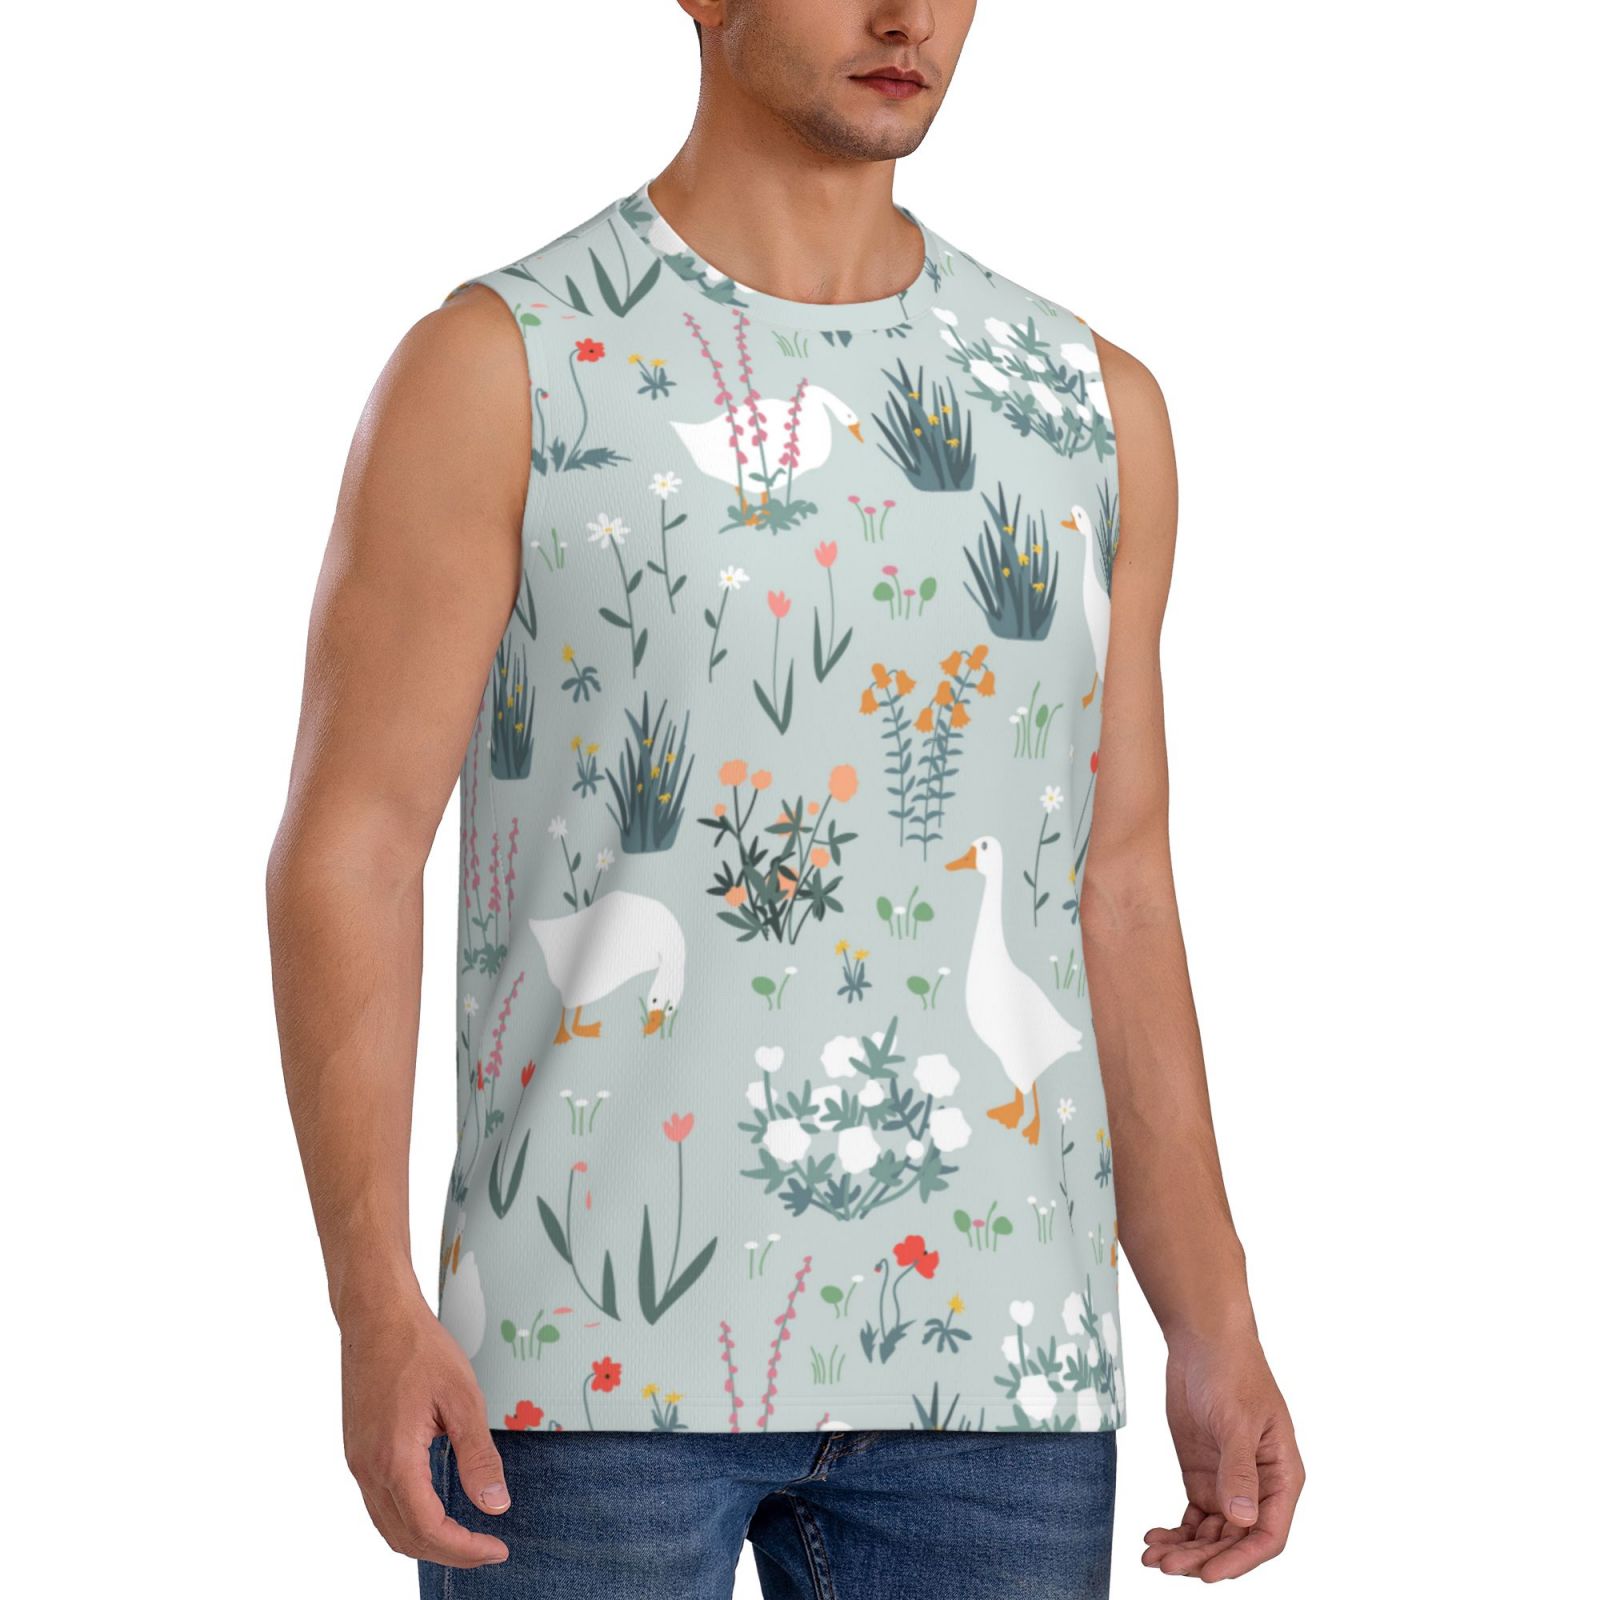 Coaee Goose and Doodle Flowers Men's Sleeveless T-Shirt with Quick Dry ...